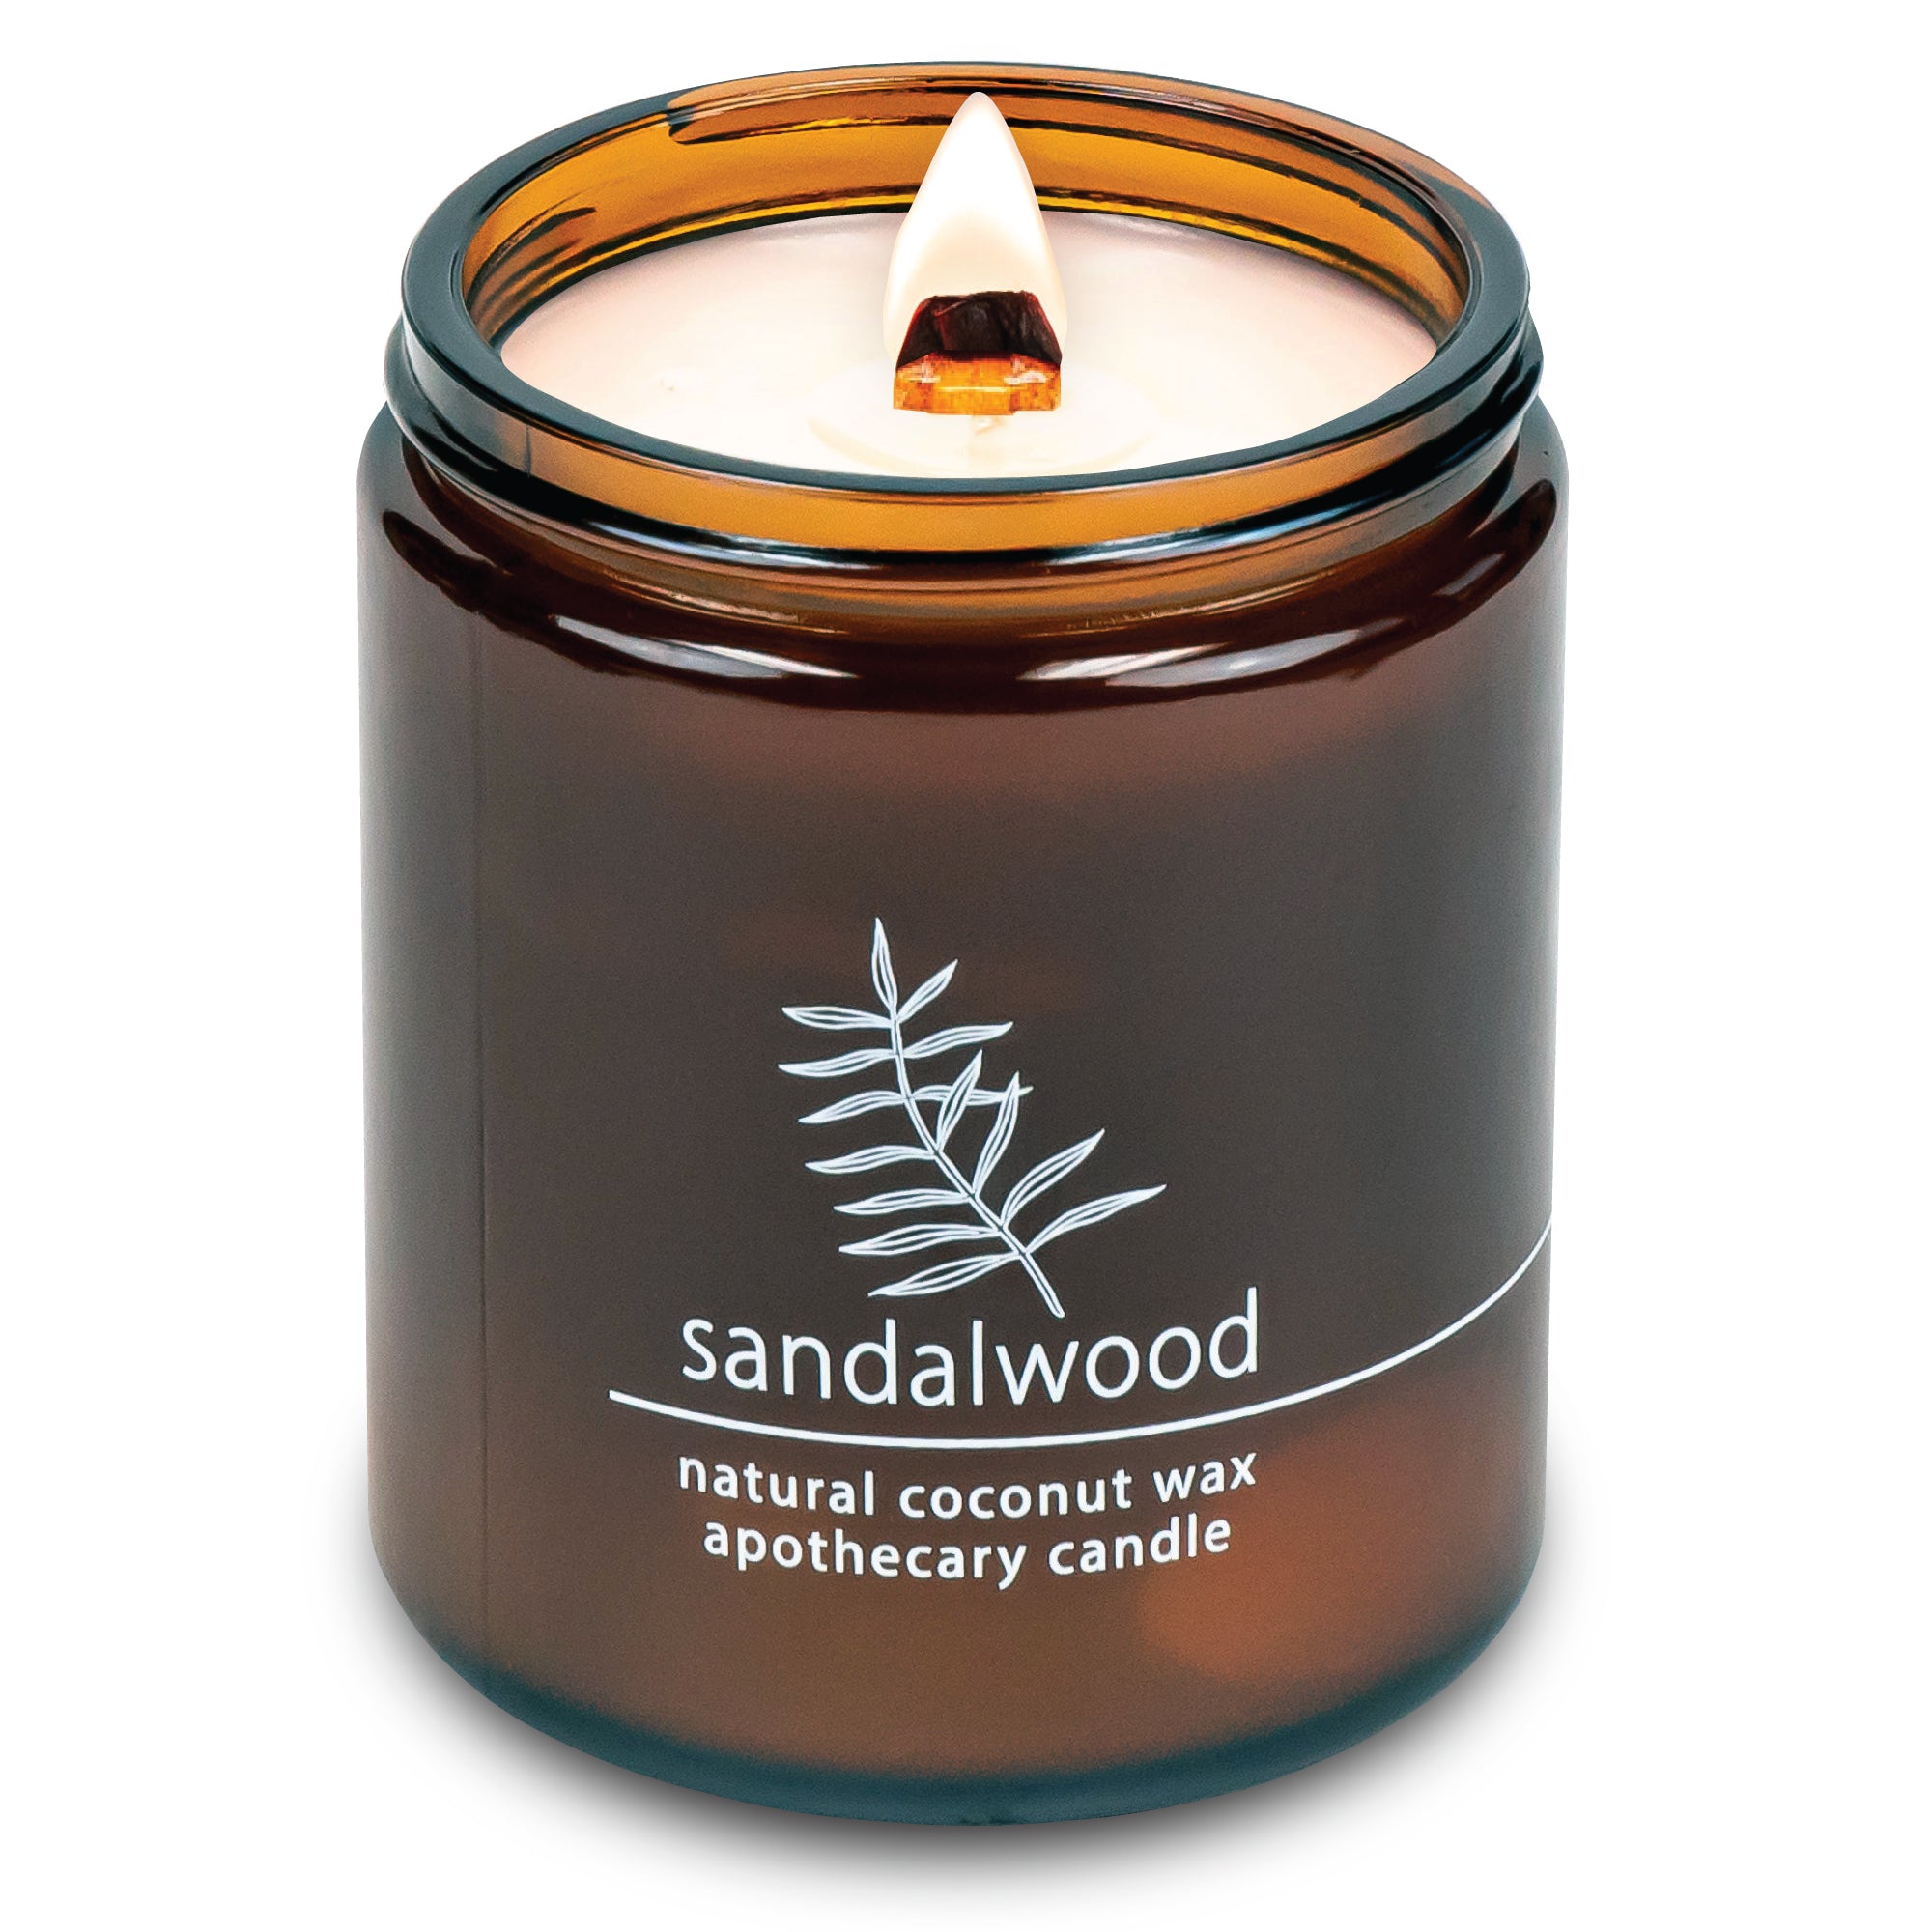  Long Lasting Candle, Wood Wick Candles That Crackle